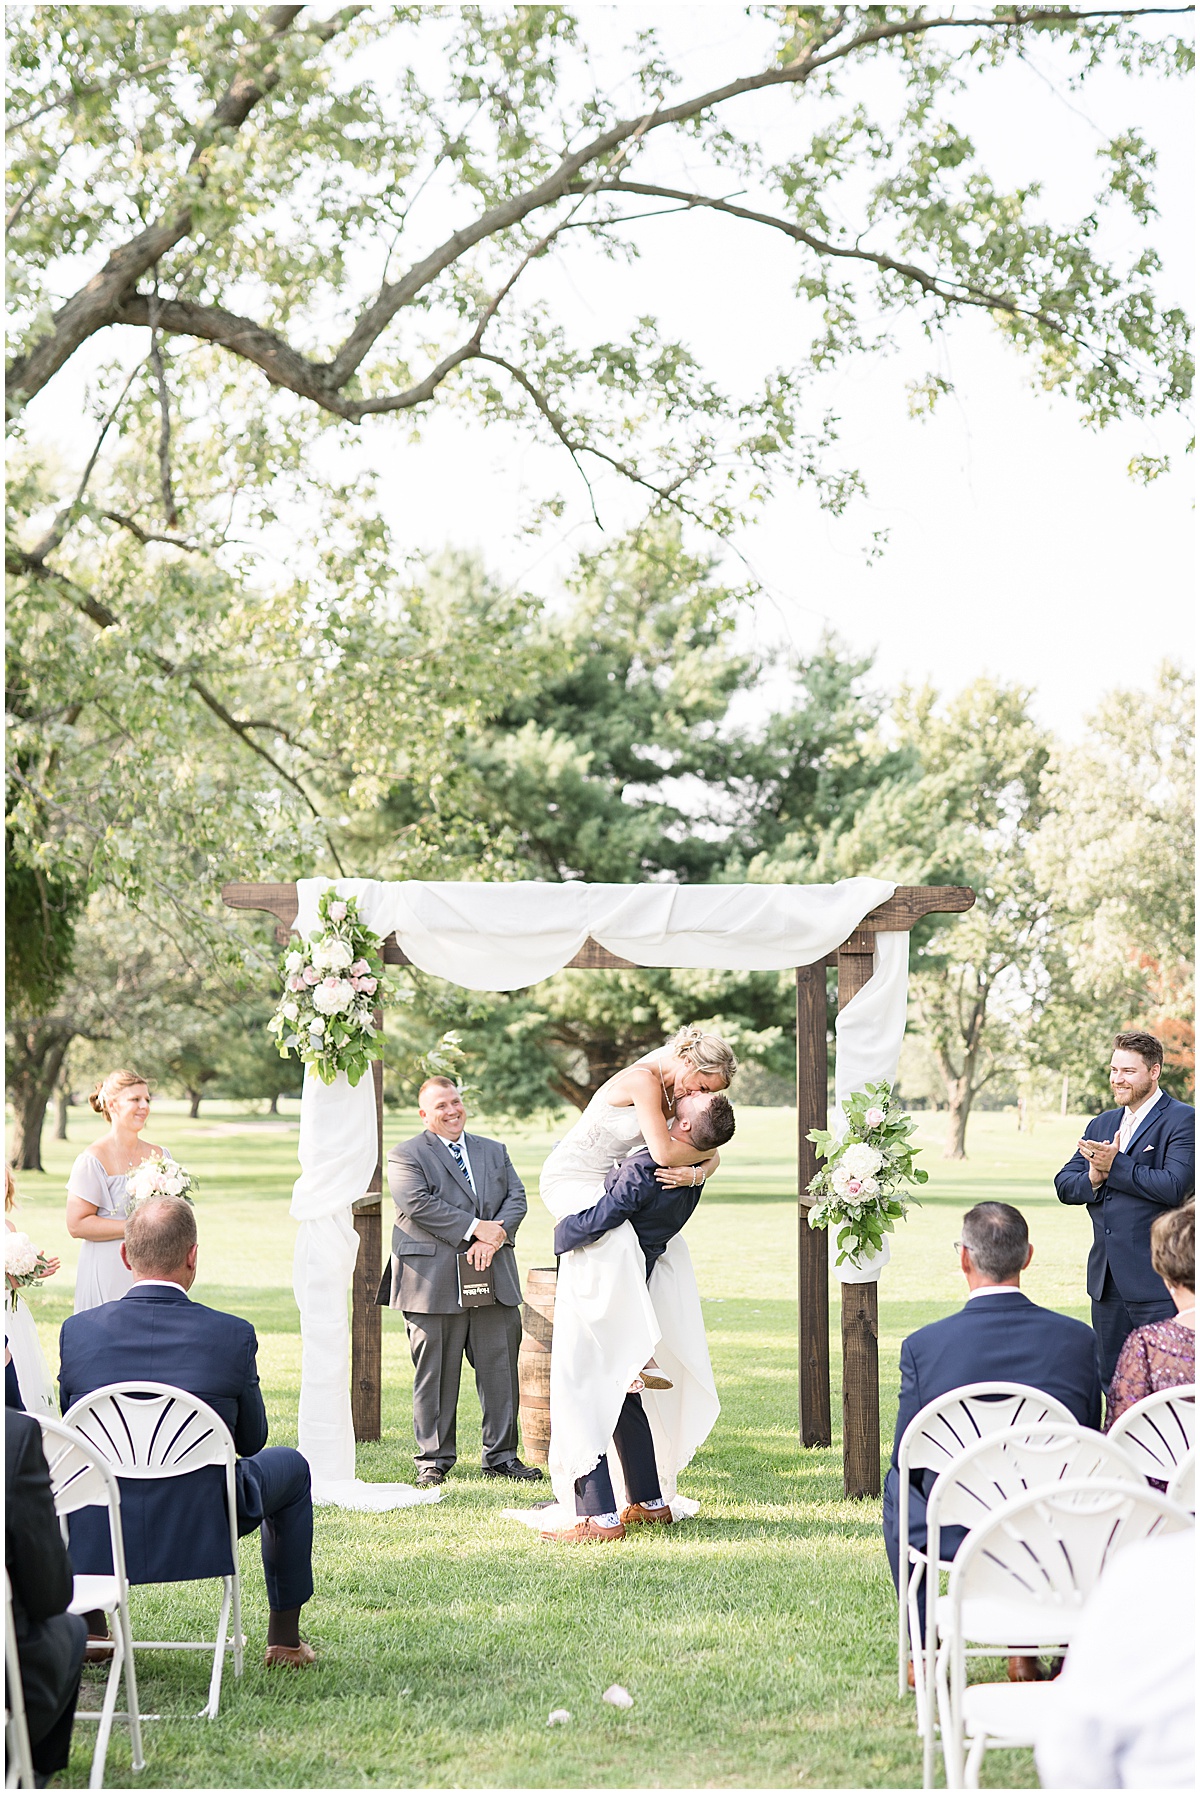 Wedding at The Edge in Anderson, Indiana photographed by Indianapolis wedding photographer Victoria Rayburn